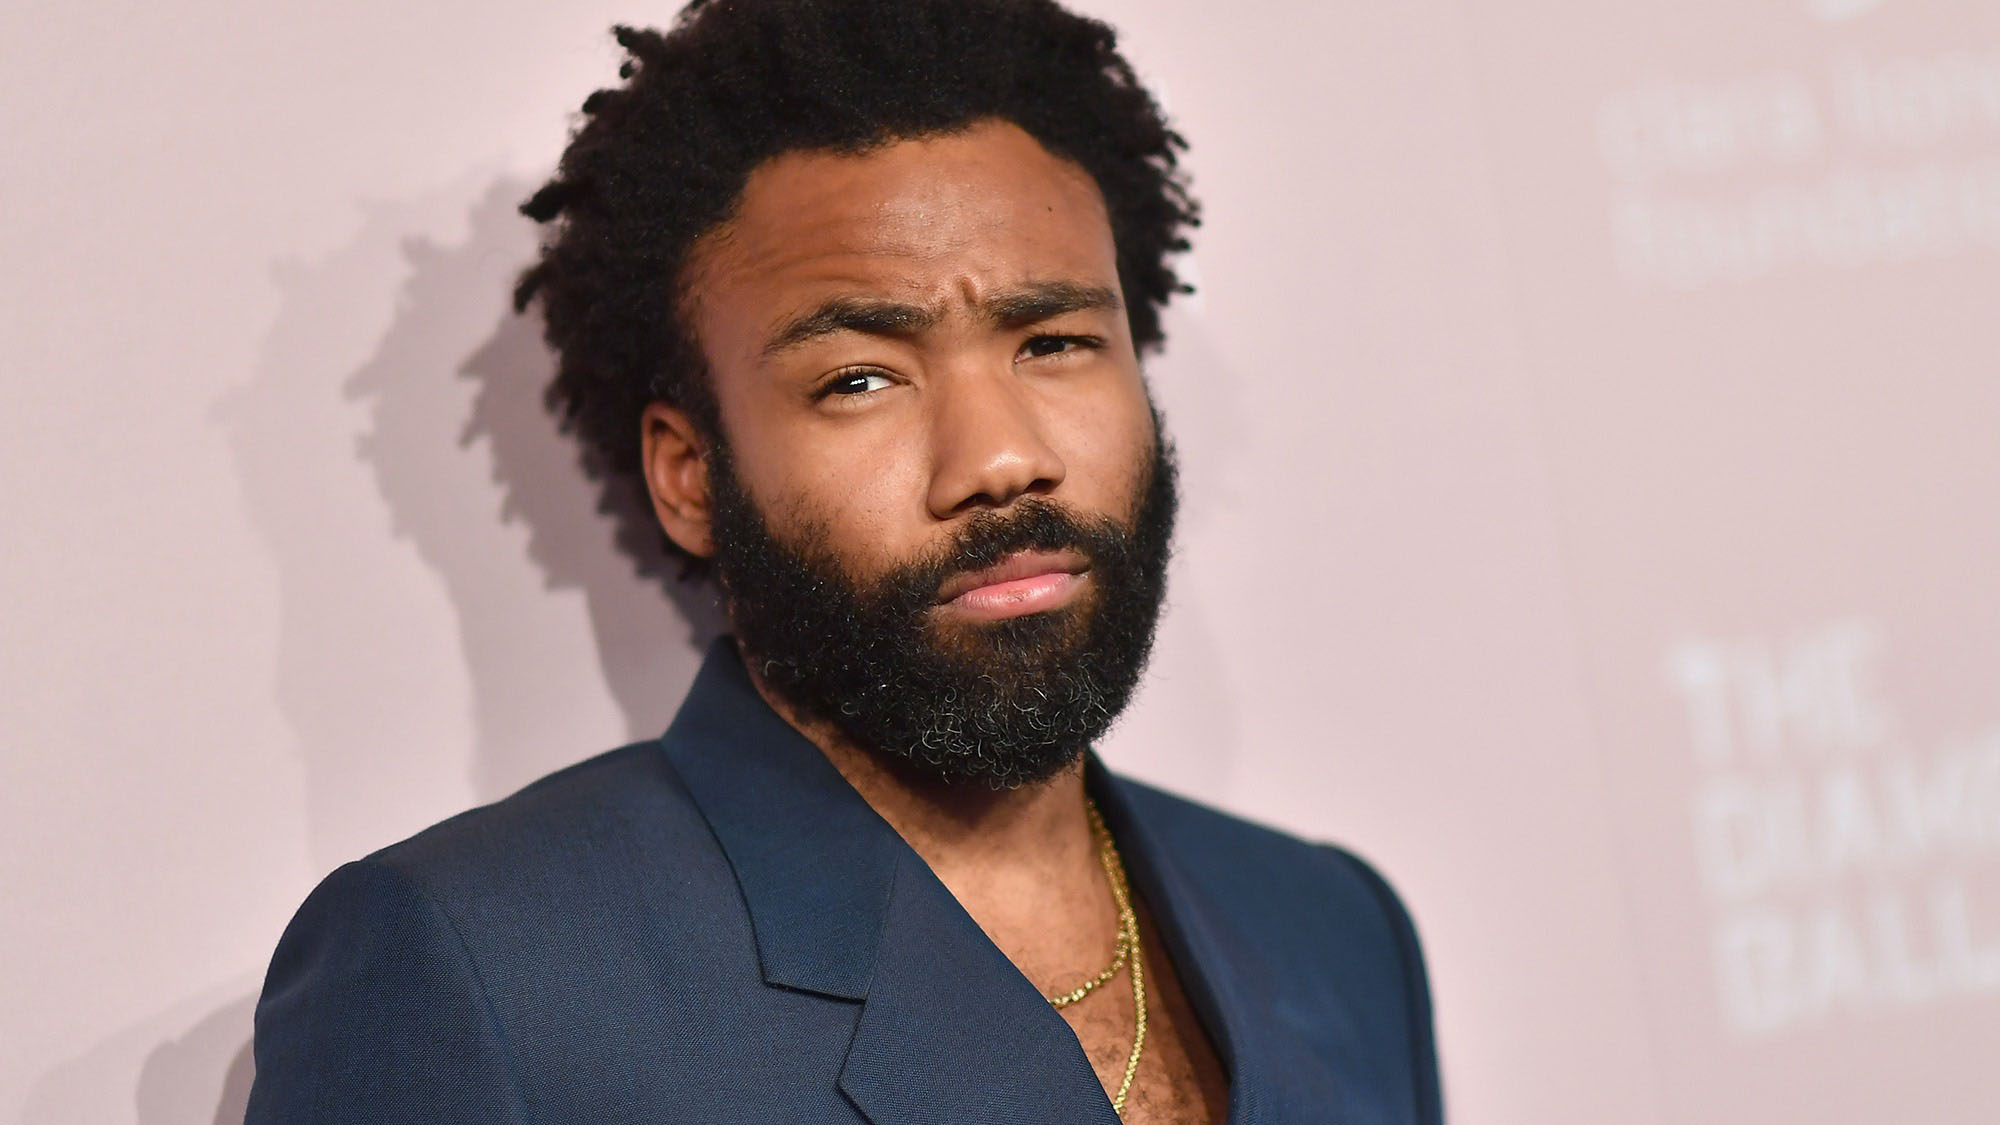 Donald McKinley Glover Jr. (born September 25, 1983), also known by the stage name Childish Gambino, is an American actor, comedian, singer,...